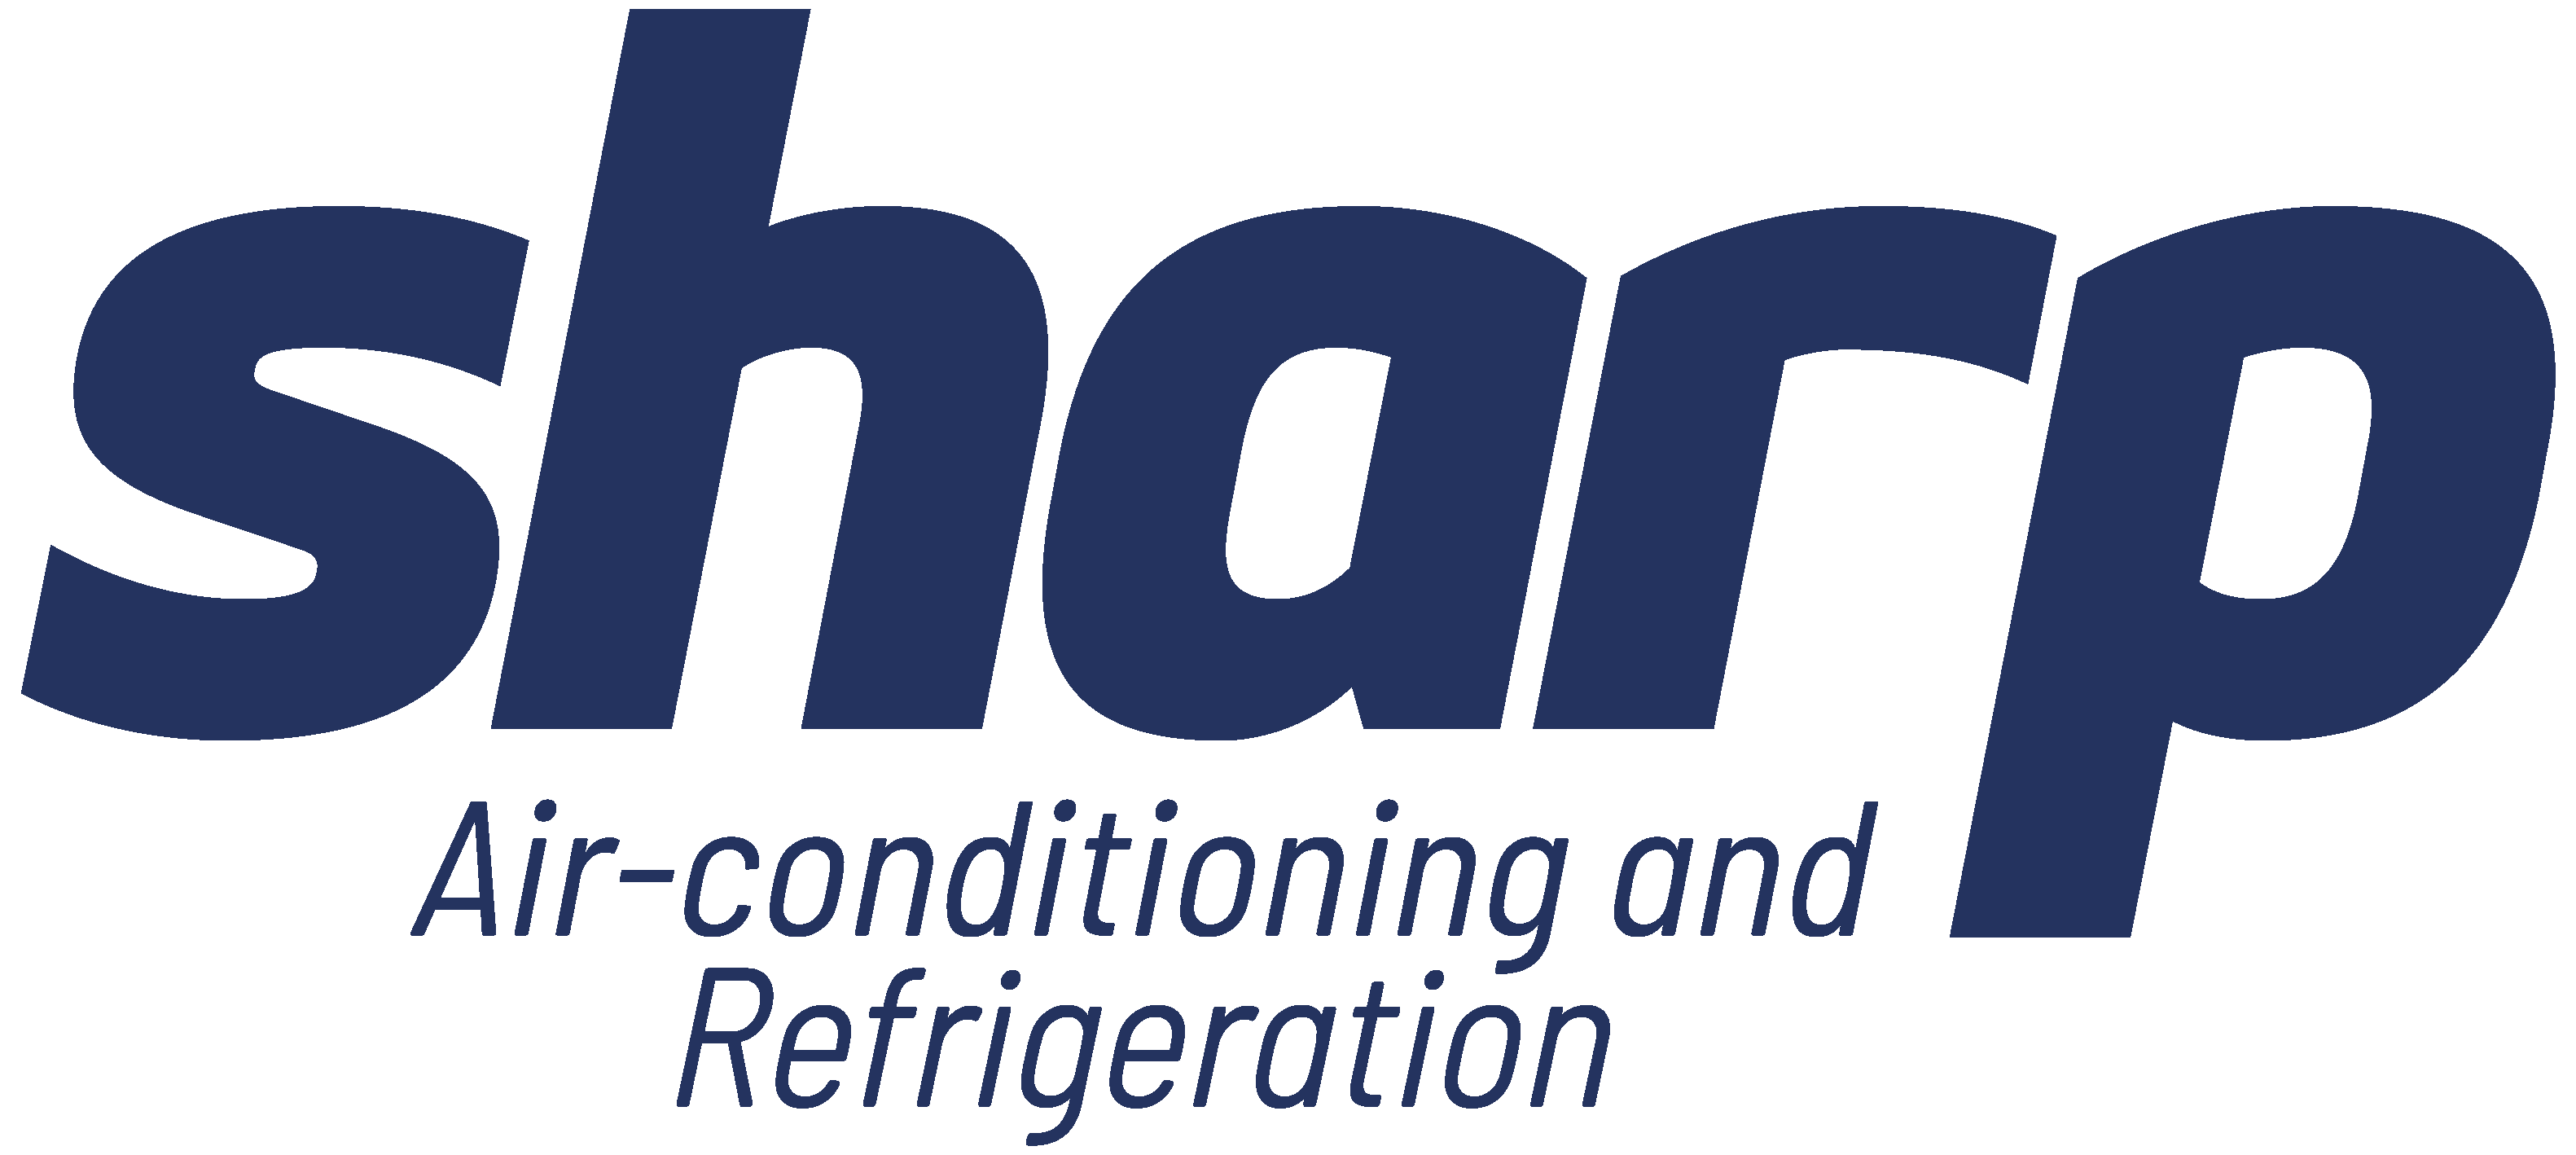 Sharp Air-conditioning and Refrigeration